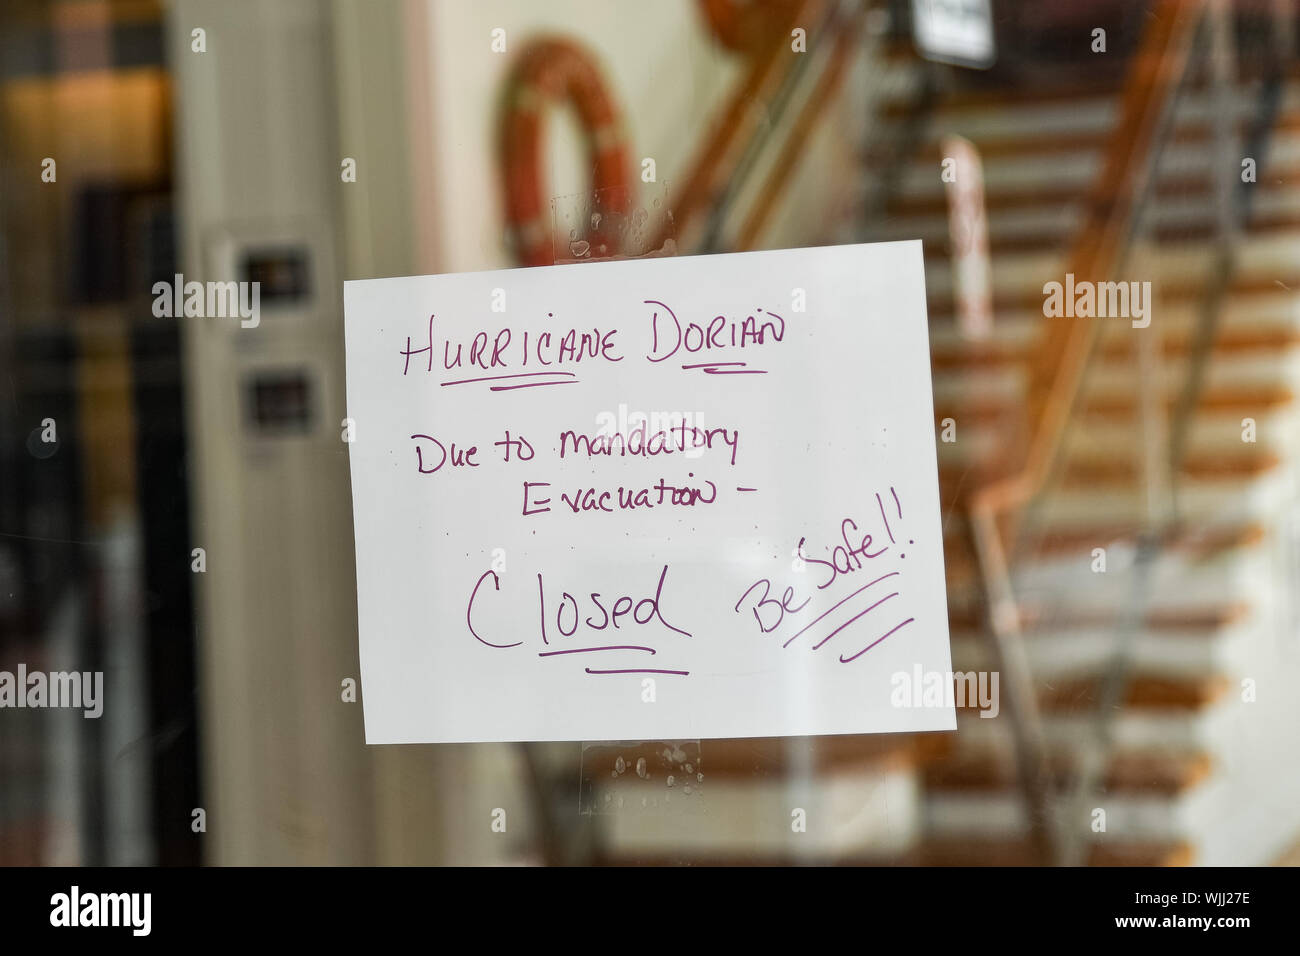 Charleston, South Carolina, USA. 03 September 2019. A closed sign on a store on King Street in the historic downtown in preparation for Hurricane Dorian September 3, 2019 in Charleston, South Carolina. The slow moving monster storm devastated the Bahamas and is expected to reach Charleston as a Category 2 by Thursday morning.  Credit: Richard Ellis/Alamy Live News Stock Photo